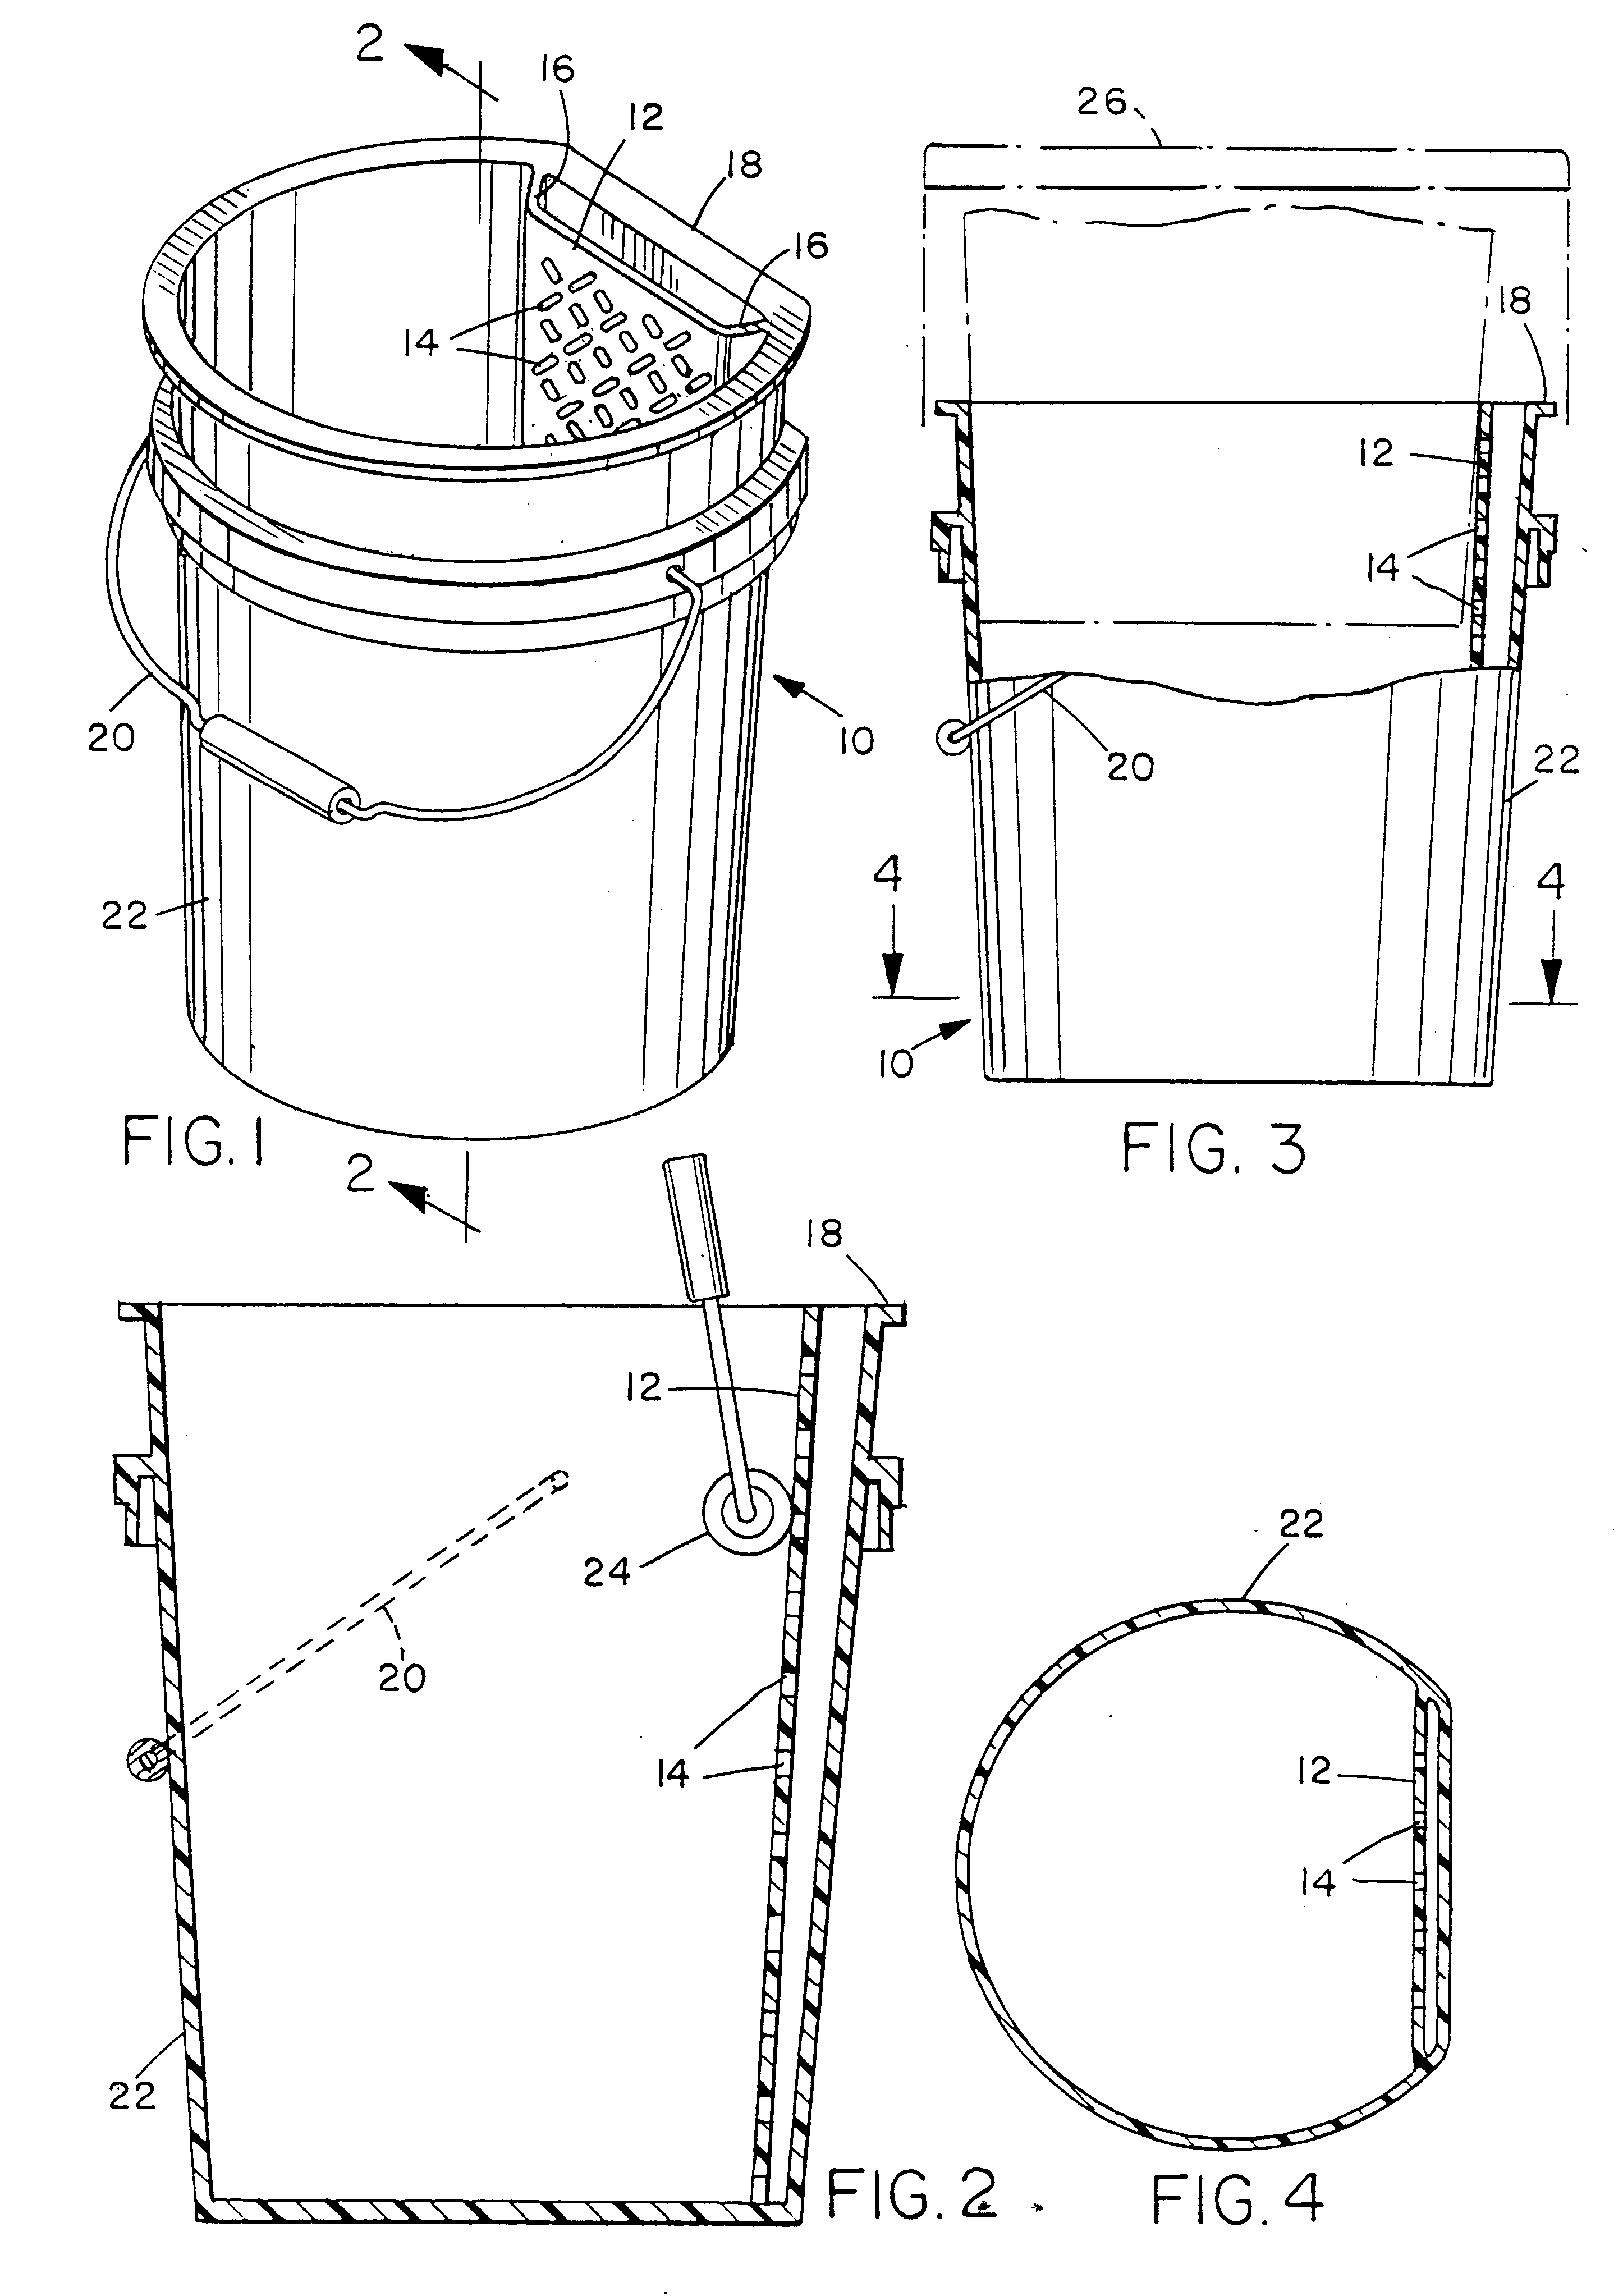 Paint bucket with integral grate